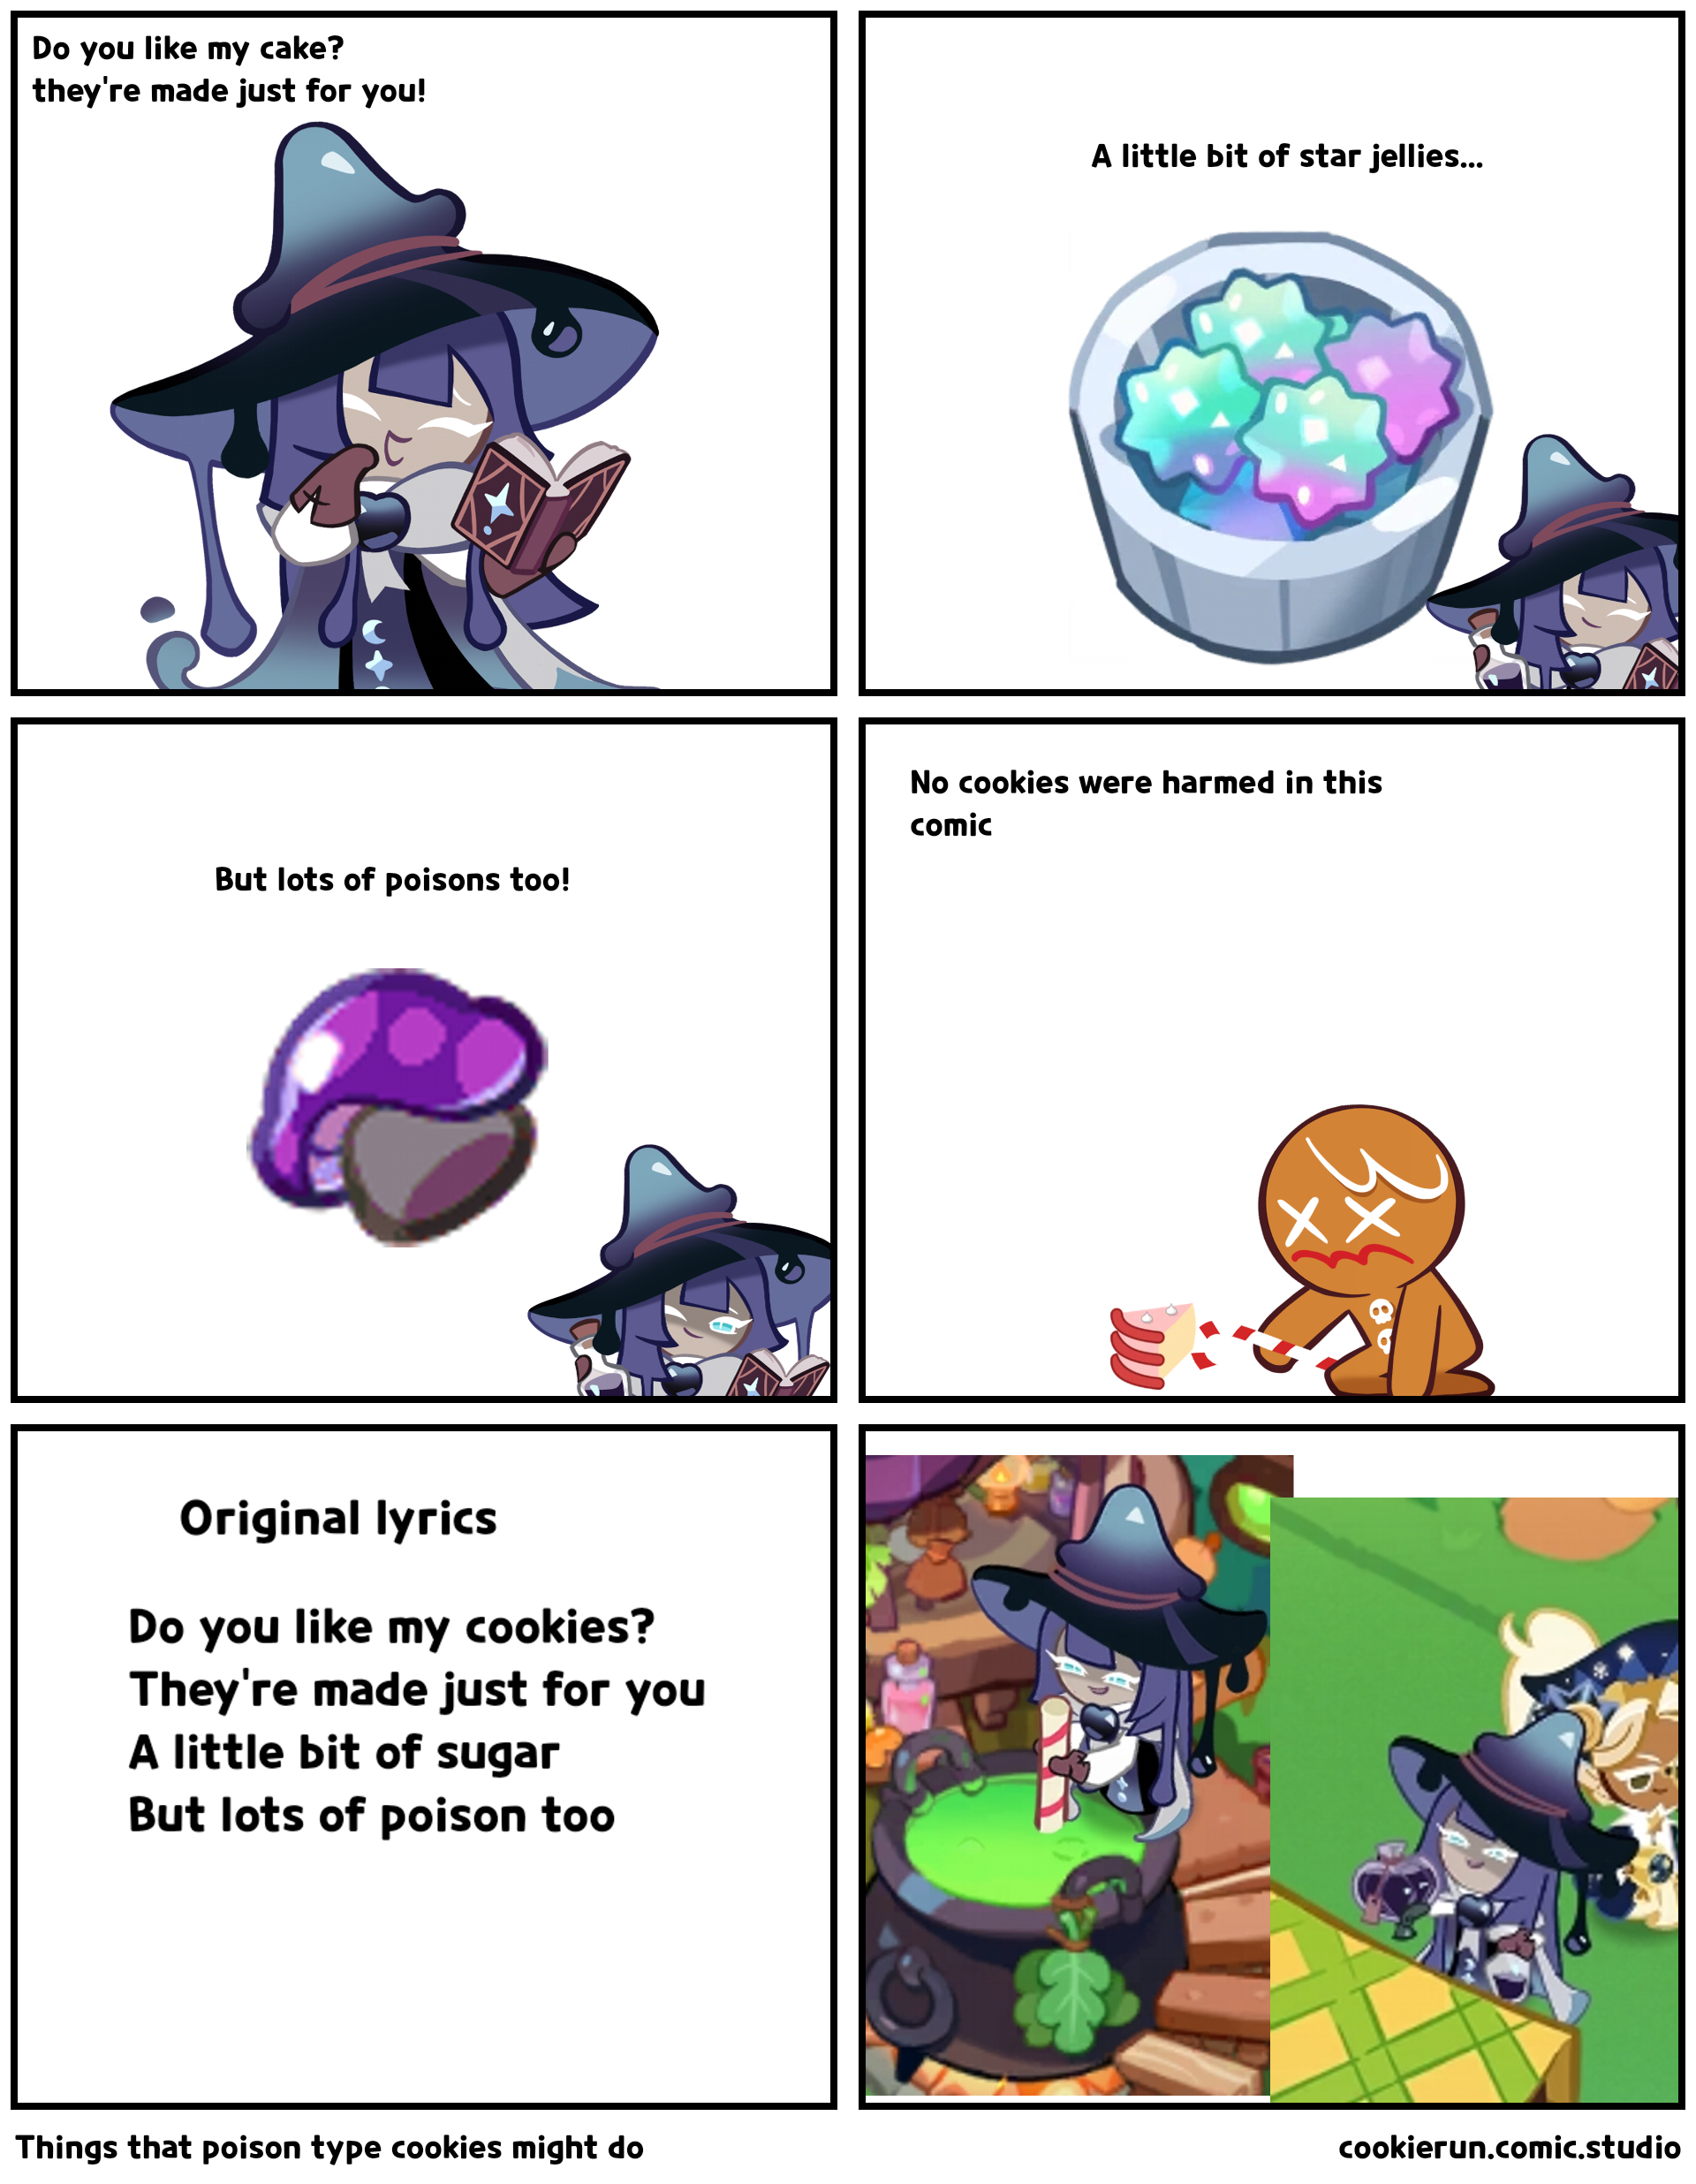 Things that poison type cookies might do